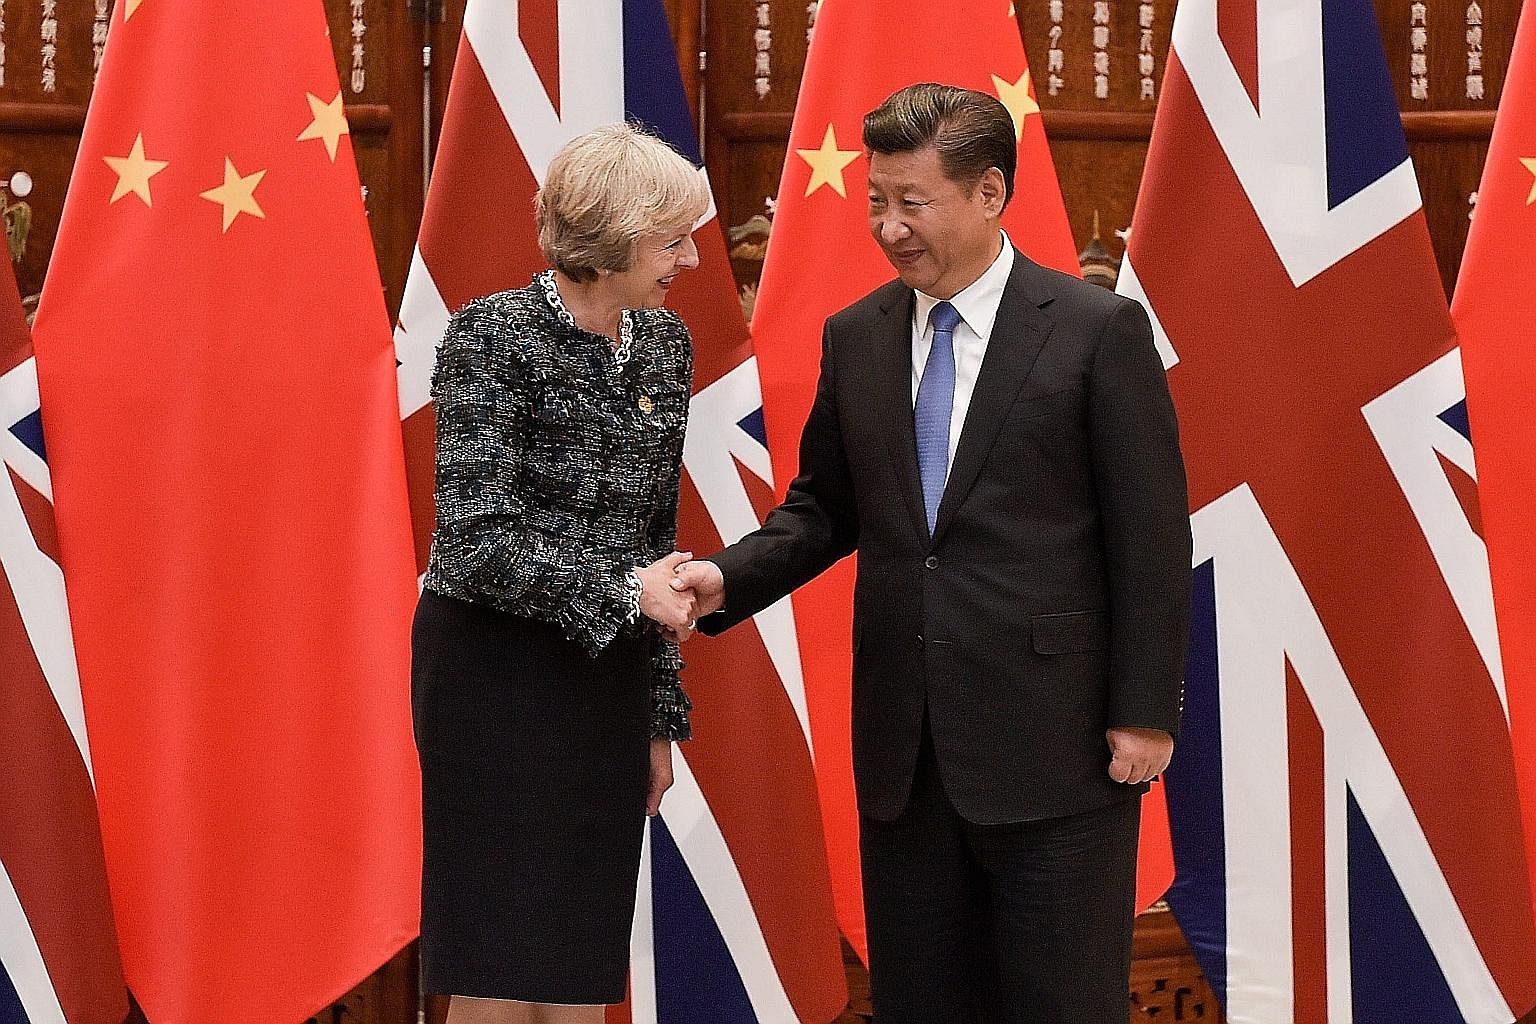 The Hinkley project was brought up when British Prime Minister Theresa May and Chinese President Xi Jinping met on the sidelines of the Group of 20 Summit in Hangzhou earlier this month.